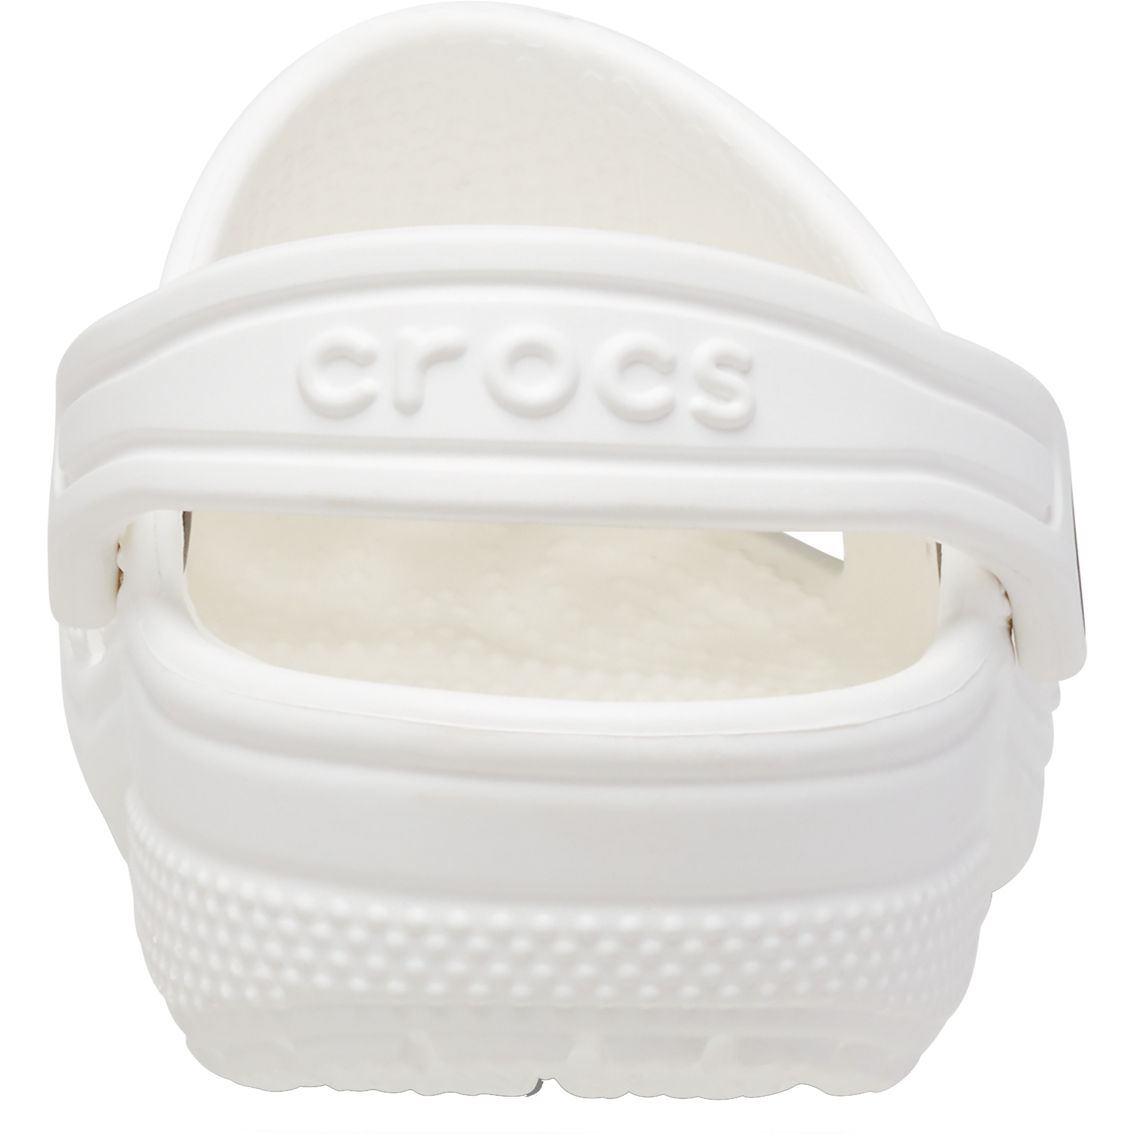 Crocs Toddlers Classic Clogs - Image 5 of 5